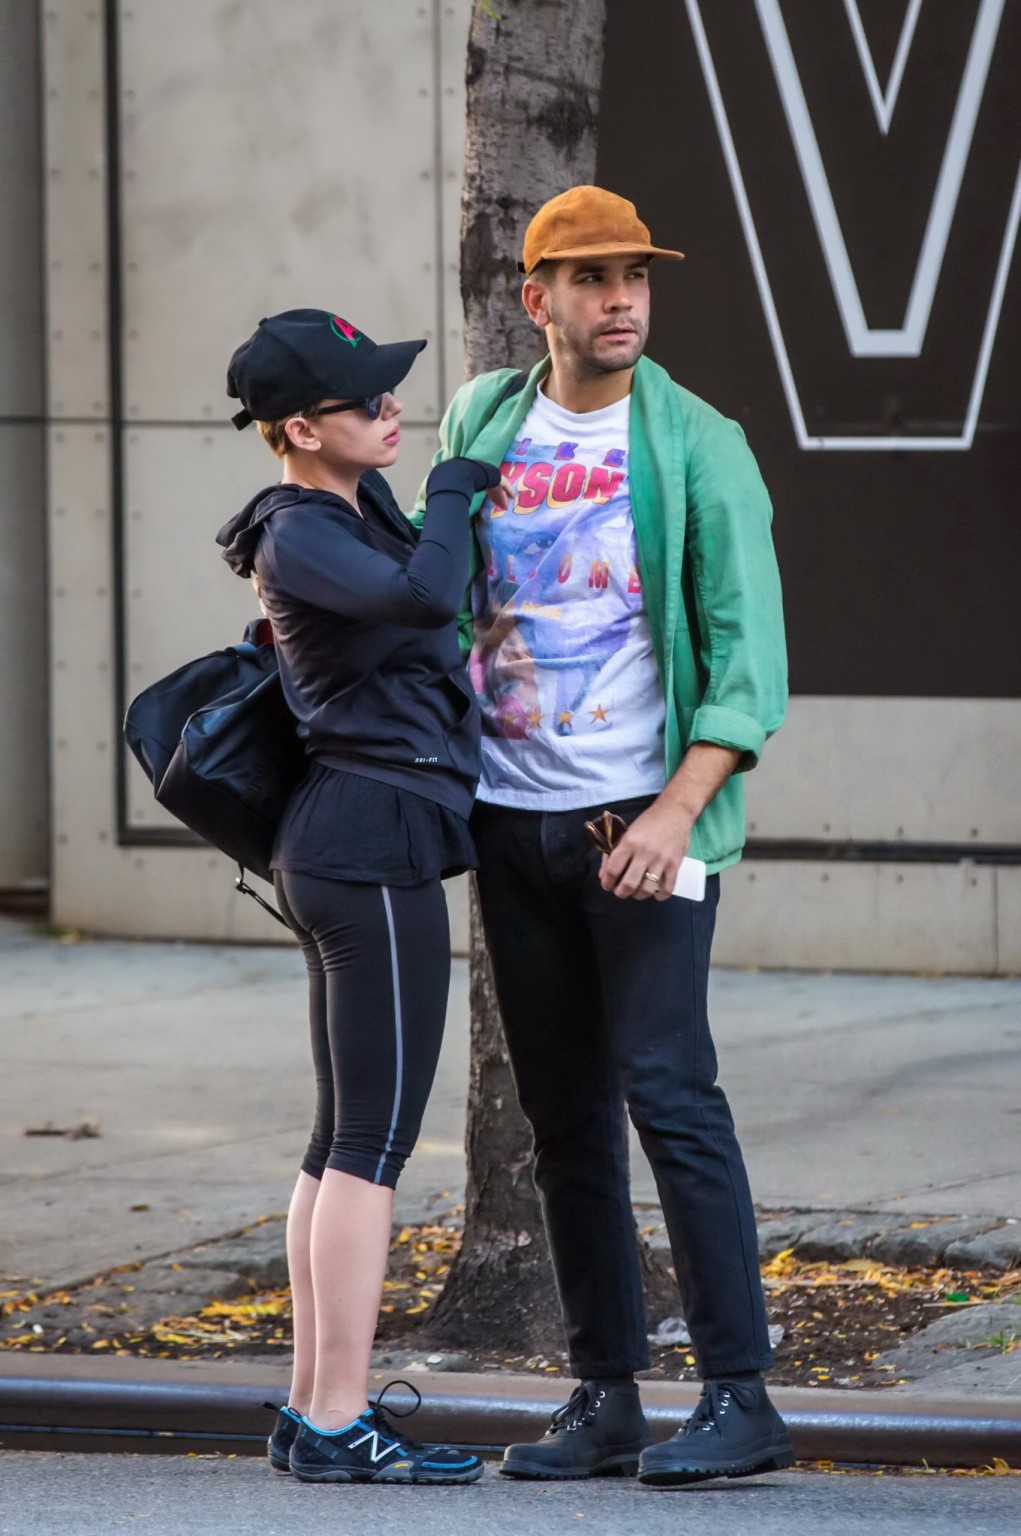 Scarlett Johansson in black leggings getting ass groped while make out in NYC #75184027